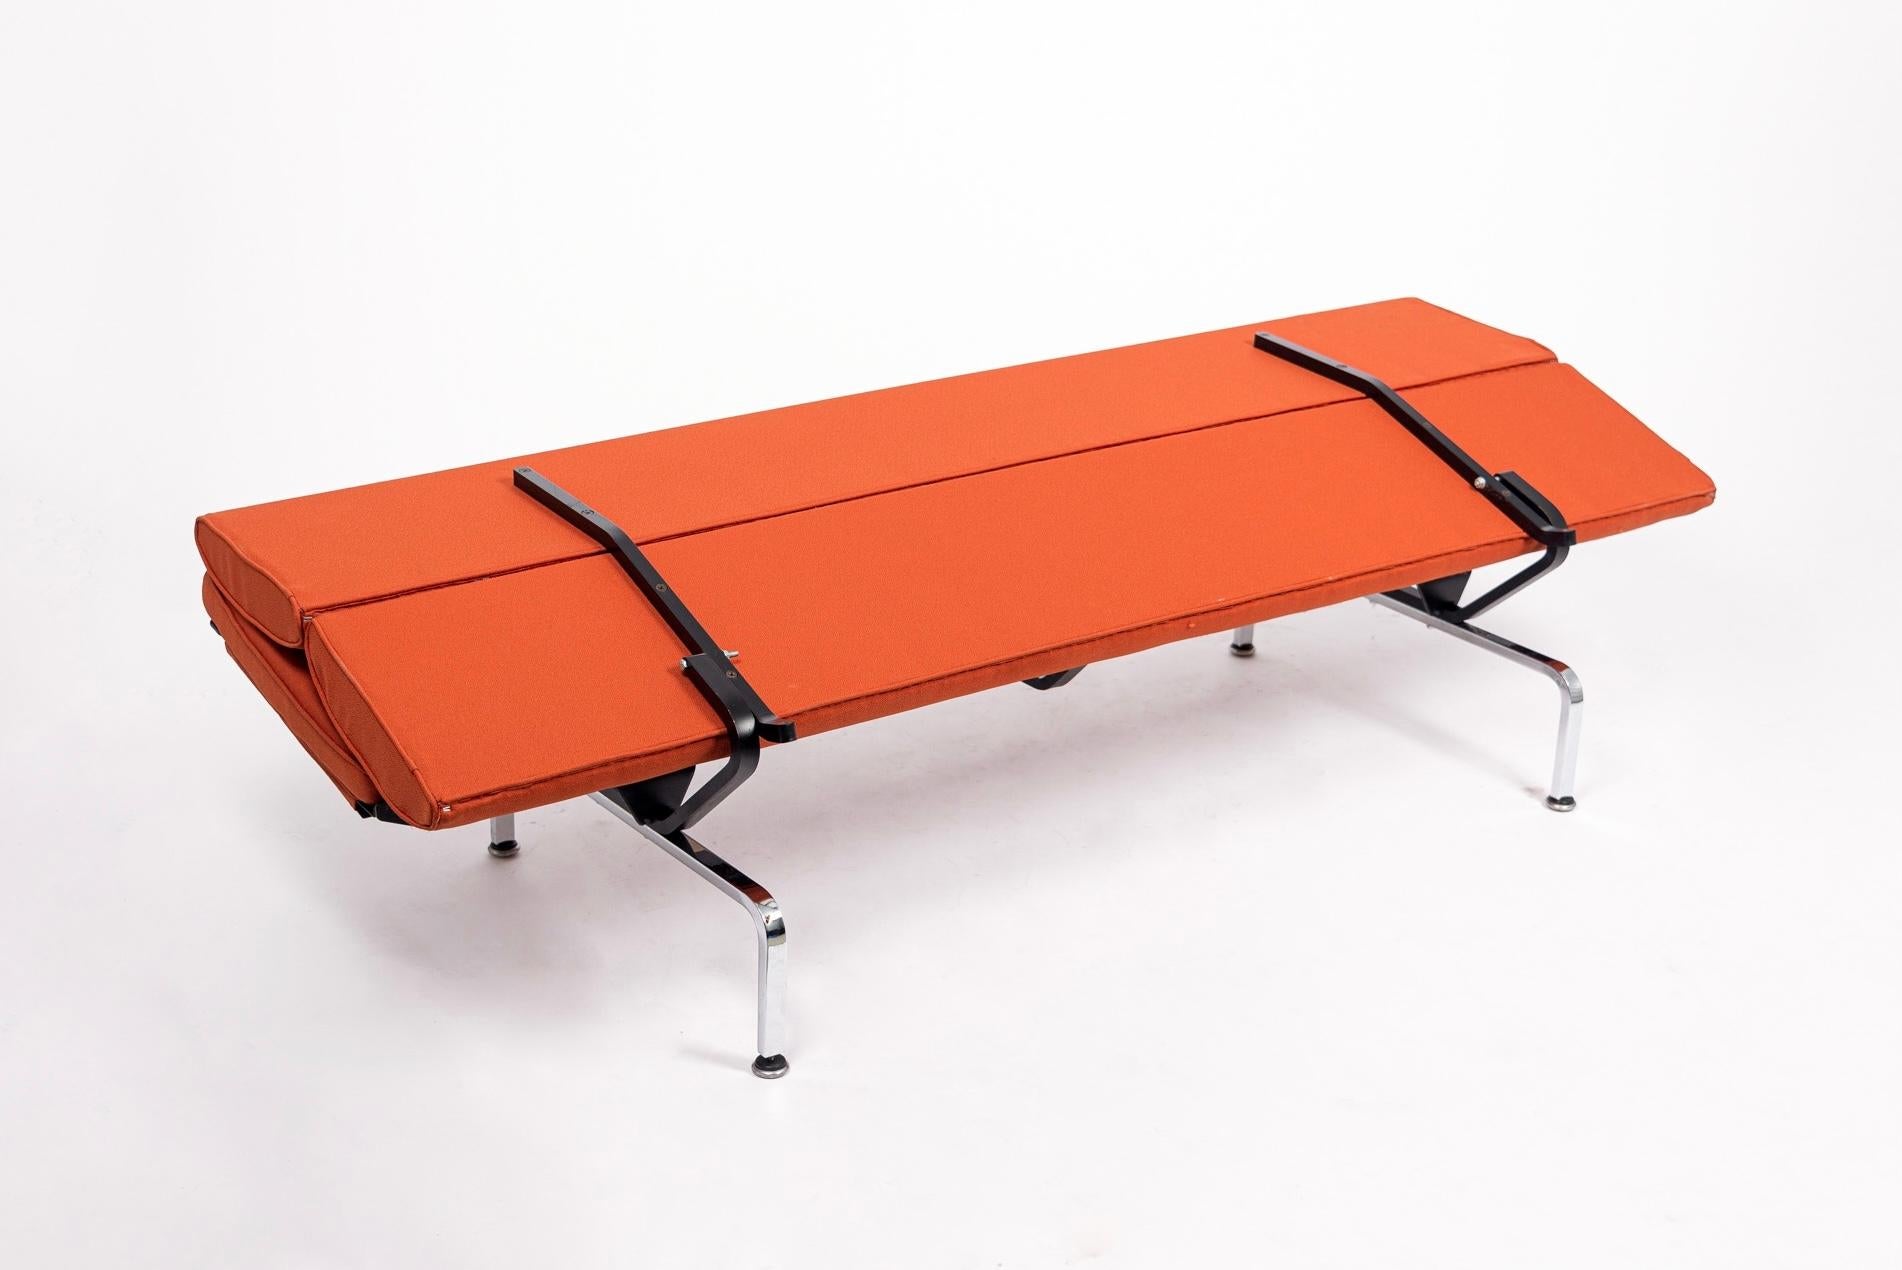 Late 20th Century 1970s Midcentury Orange Sofa Compact by Charles & Ray Eames for Herman Miller